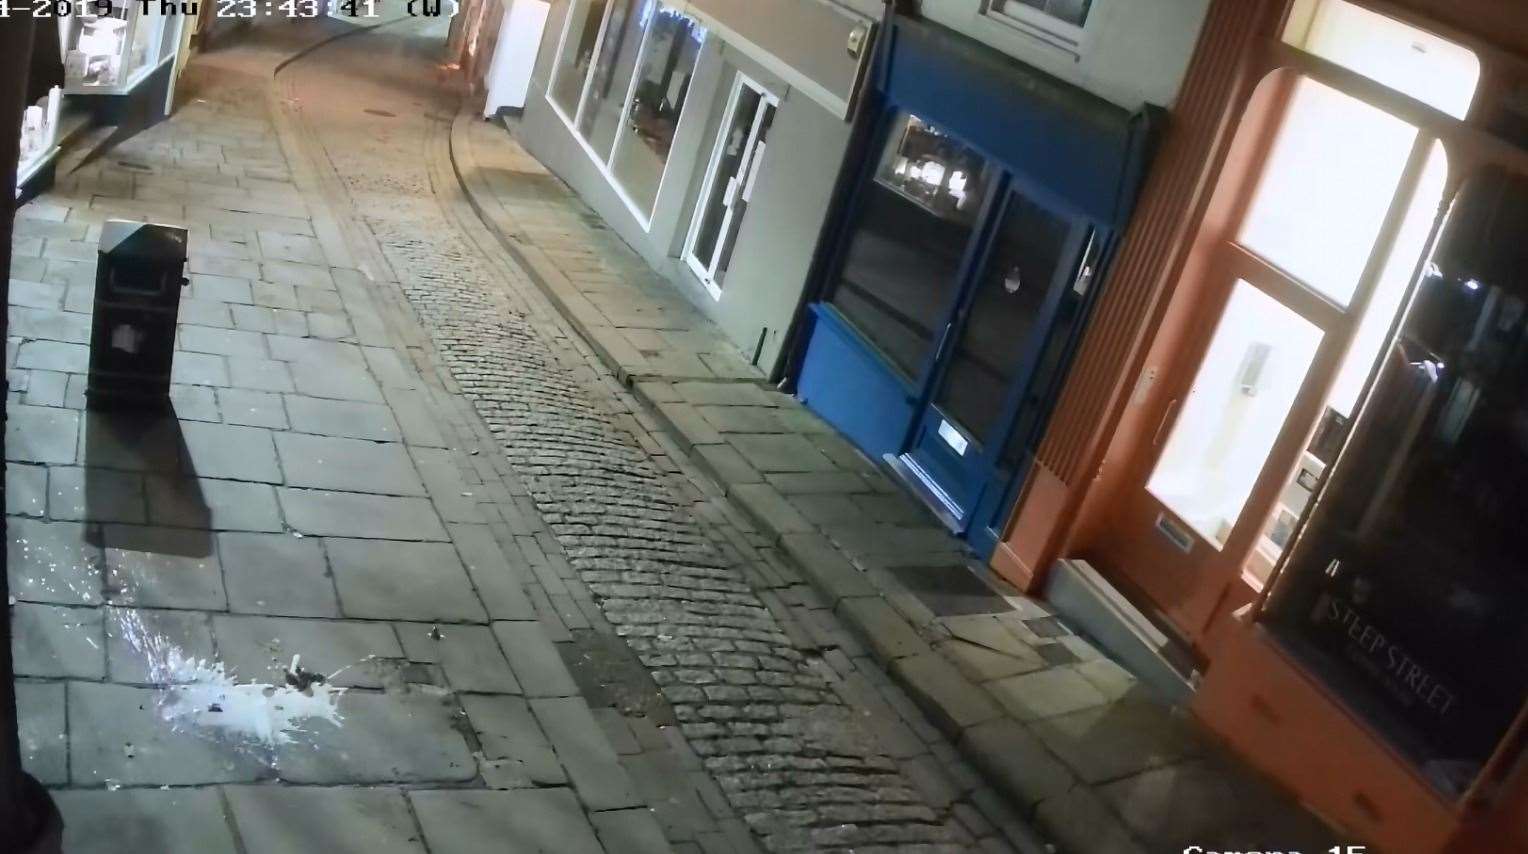 The broken beer bottle used to smash one of the windows can be seem on the ground